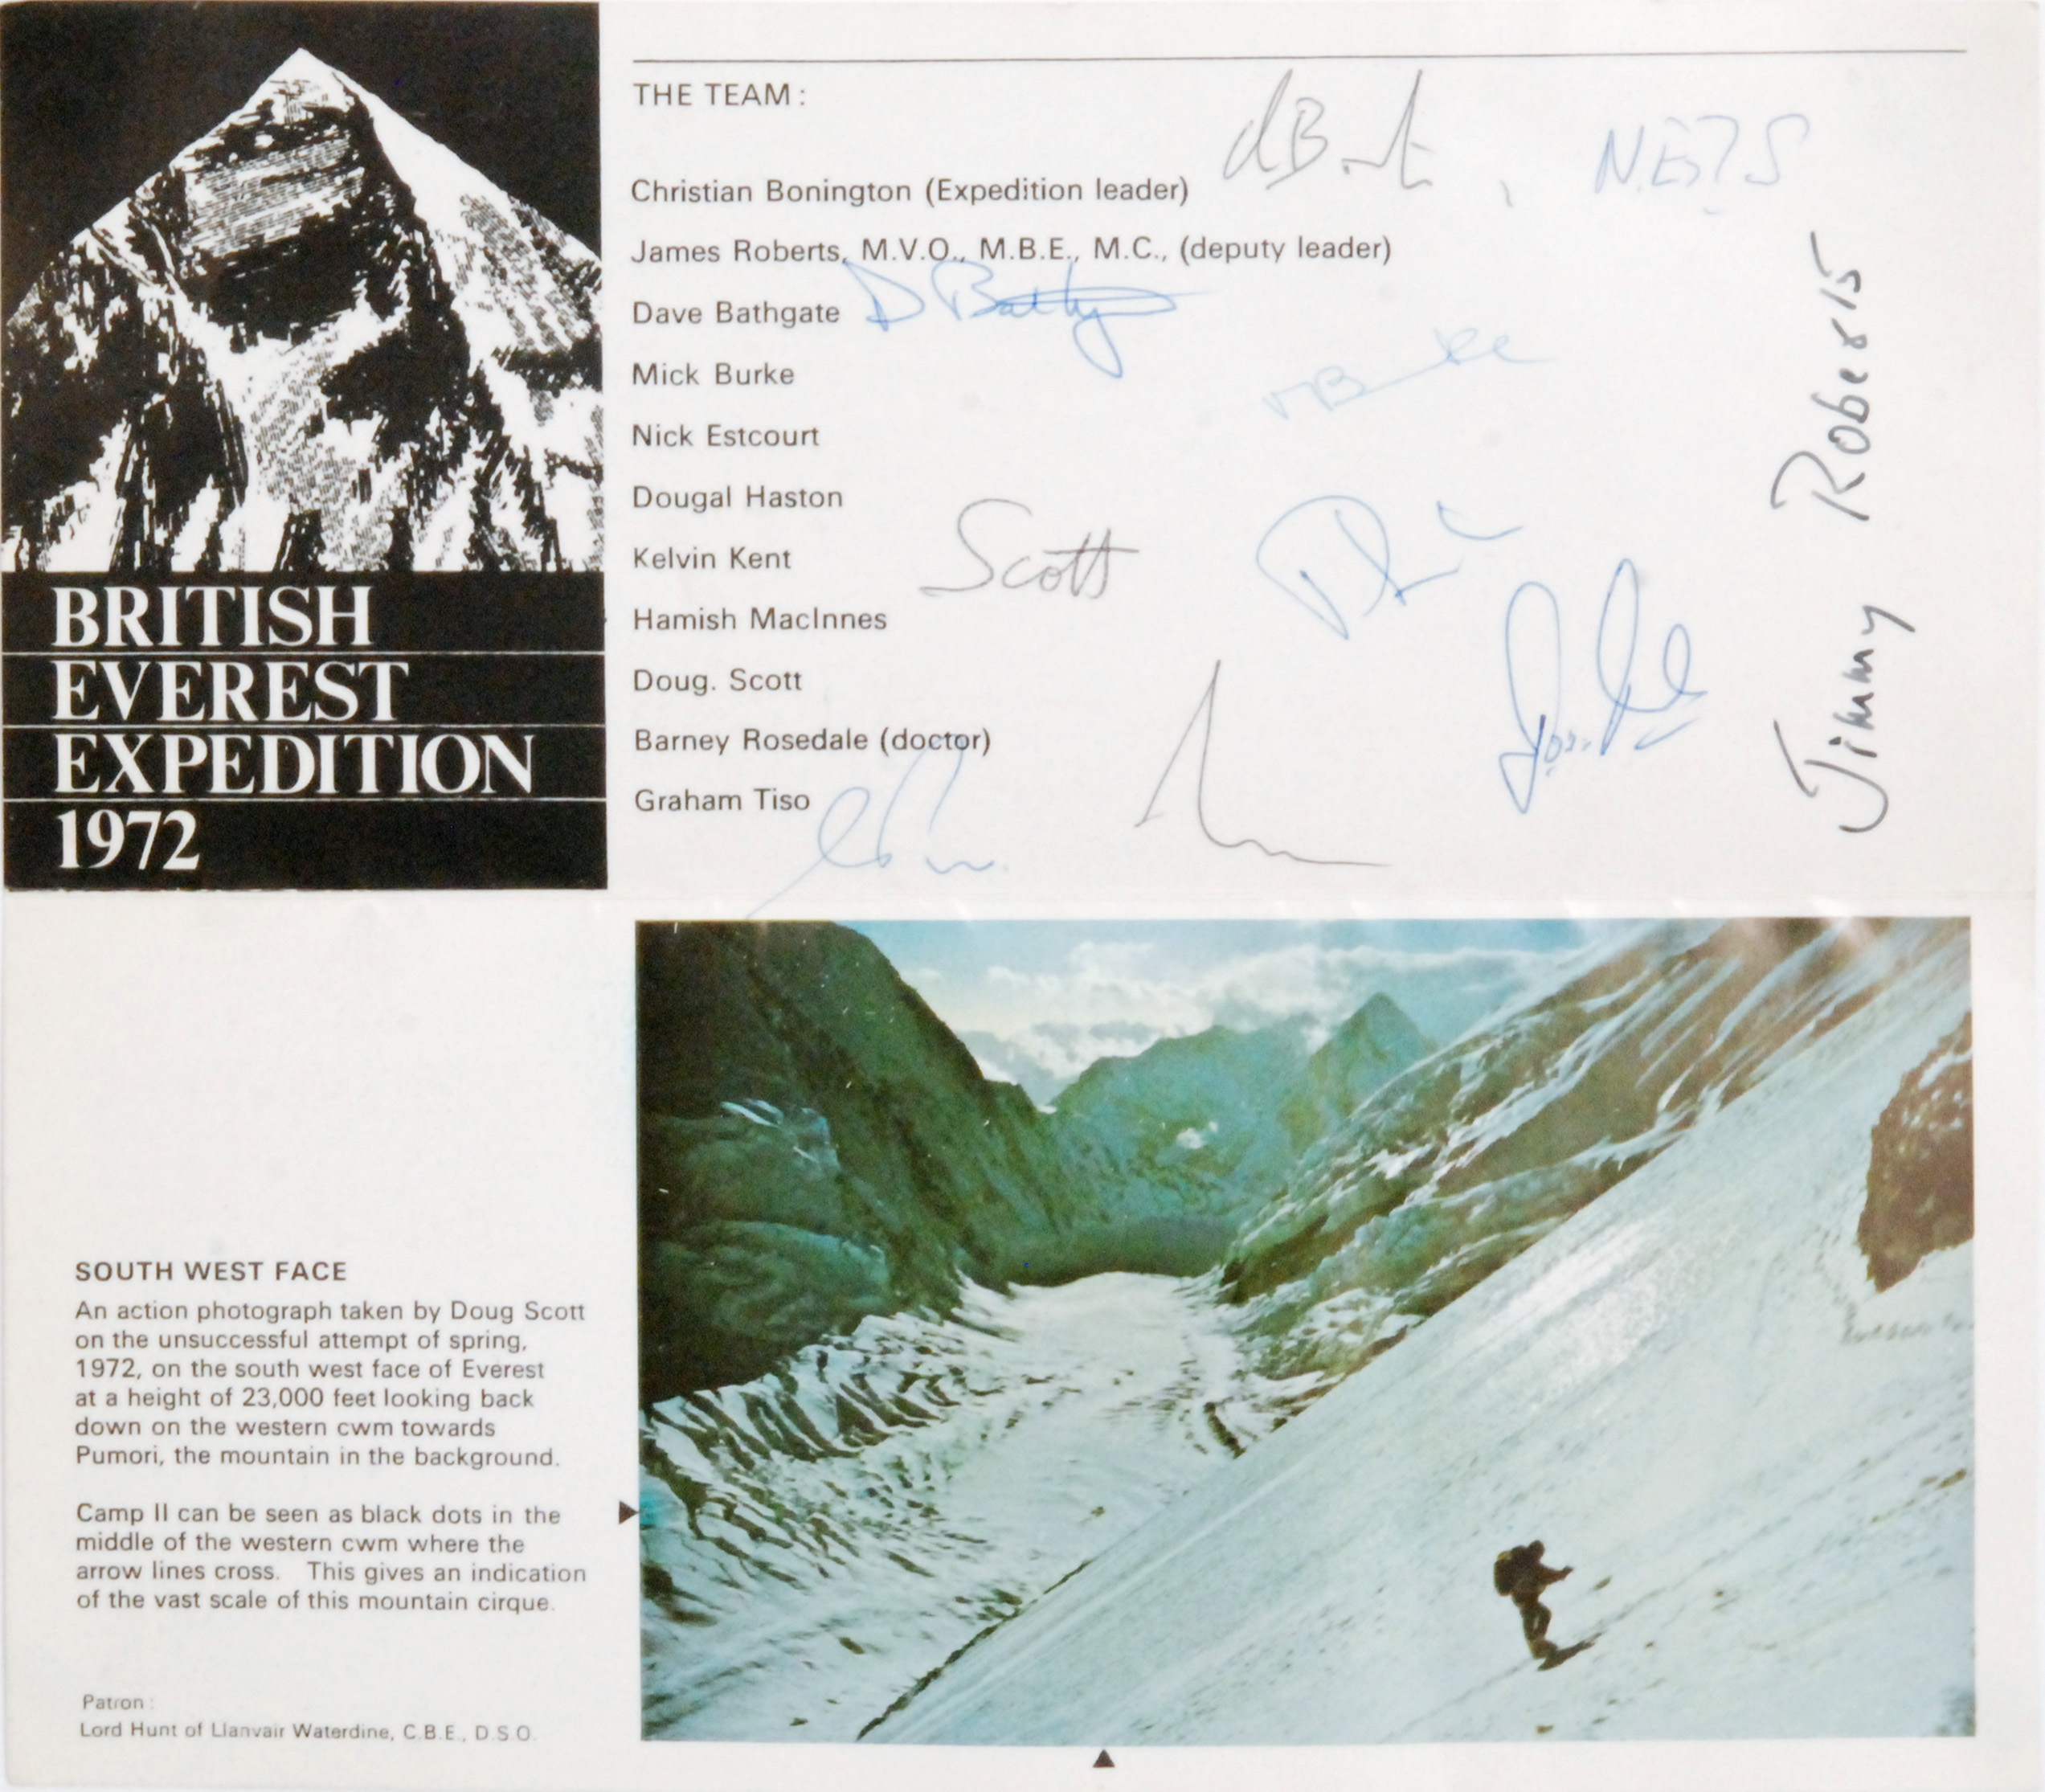 A pamphlet signed by the 1972 British Everest Expedition team led by Chris Bonington,